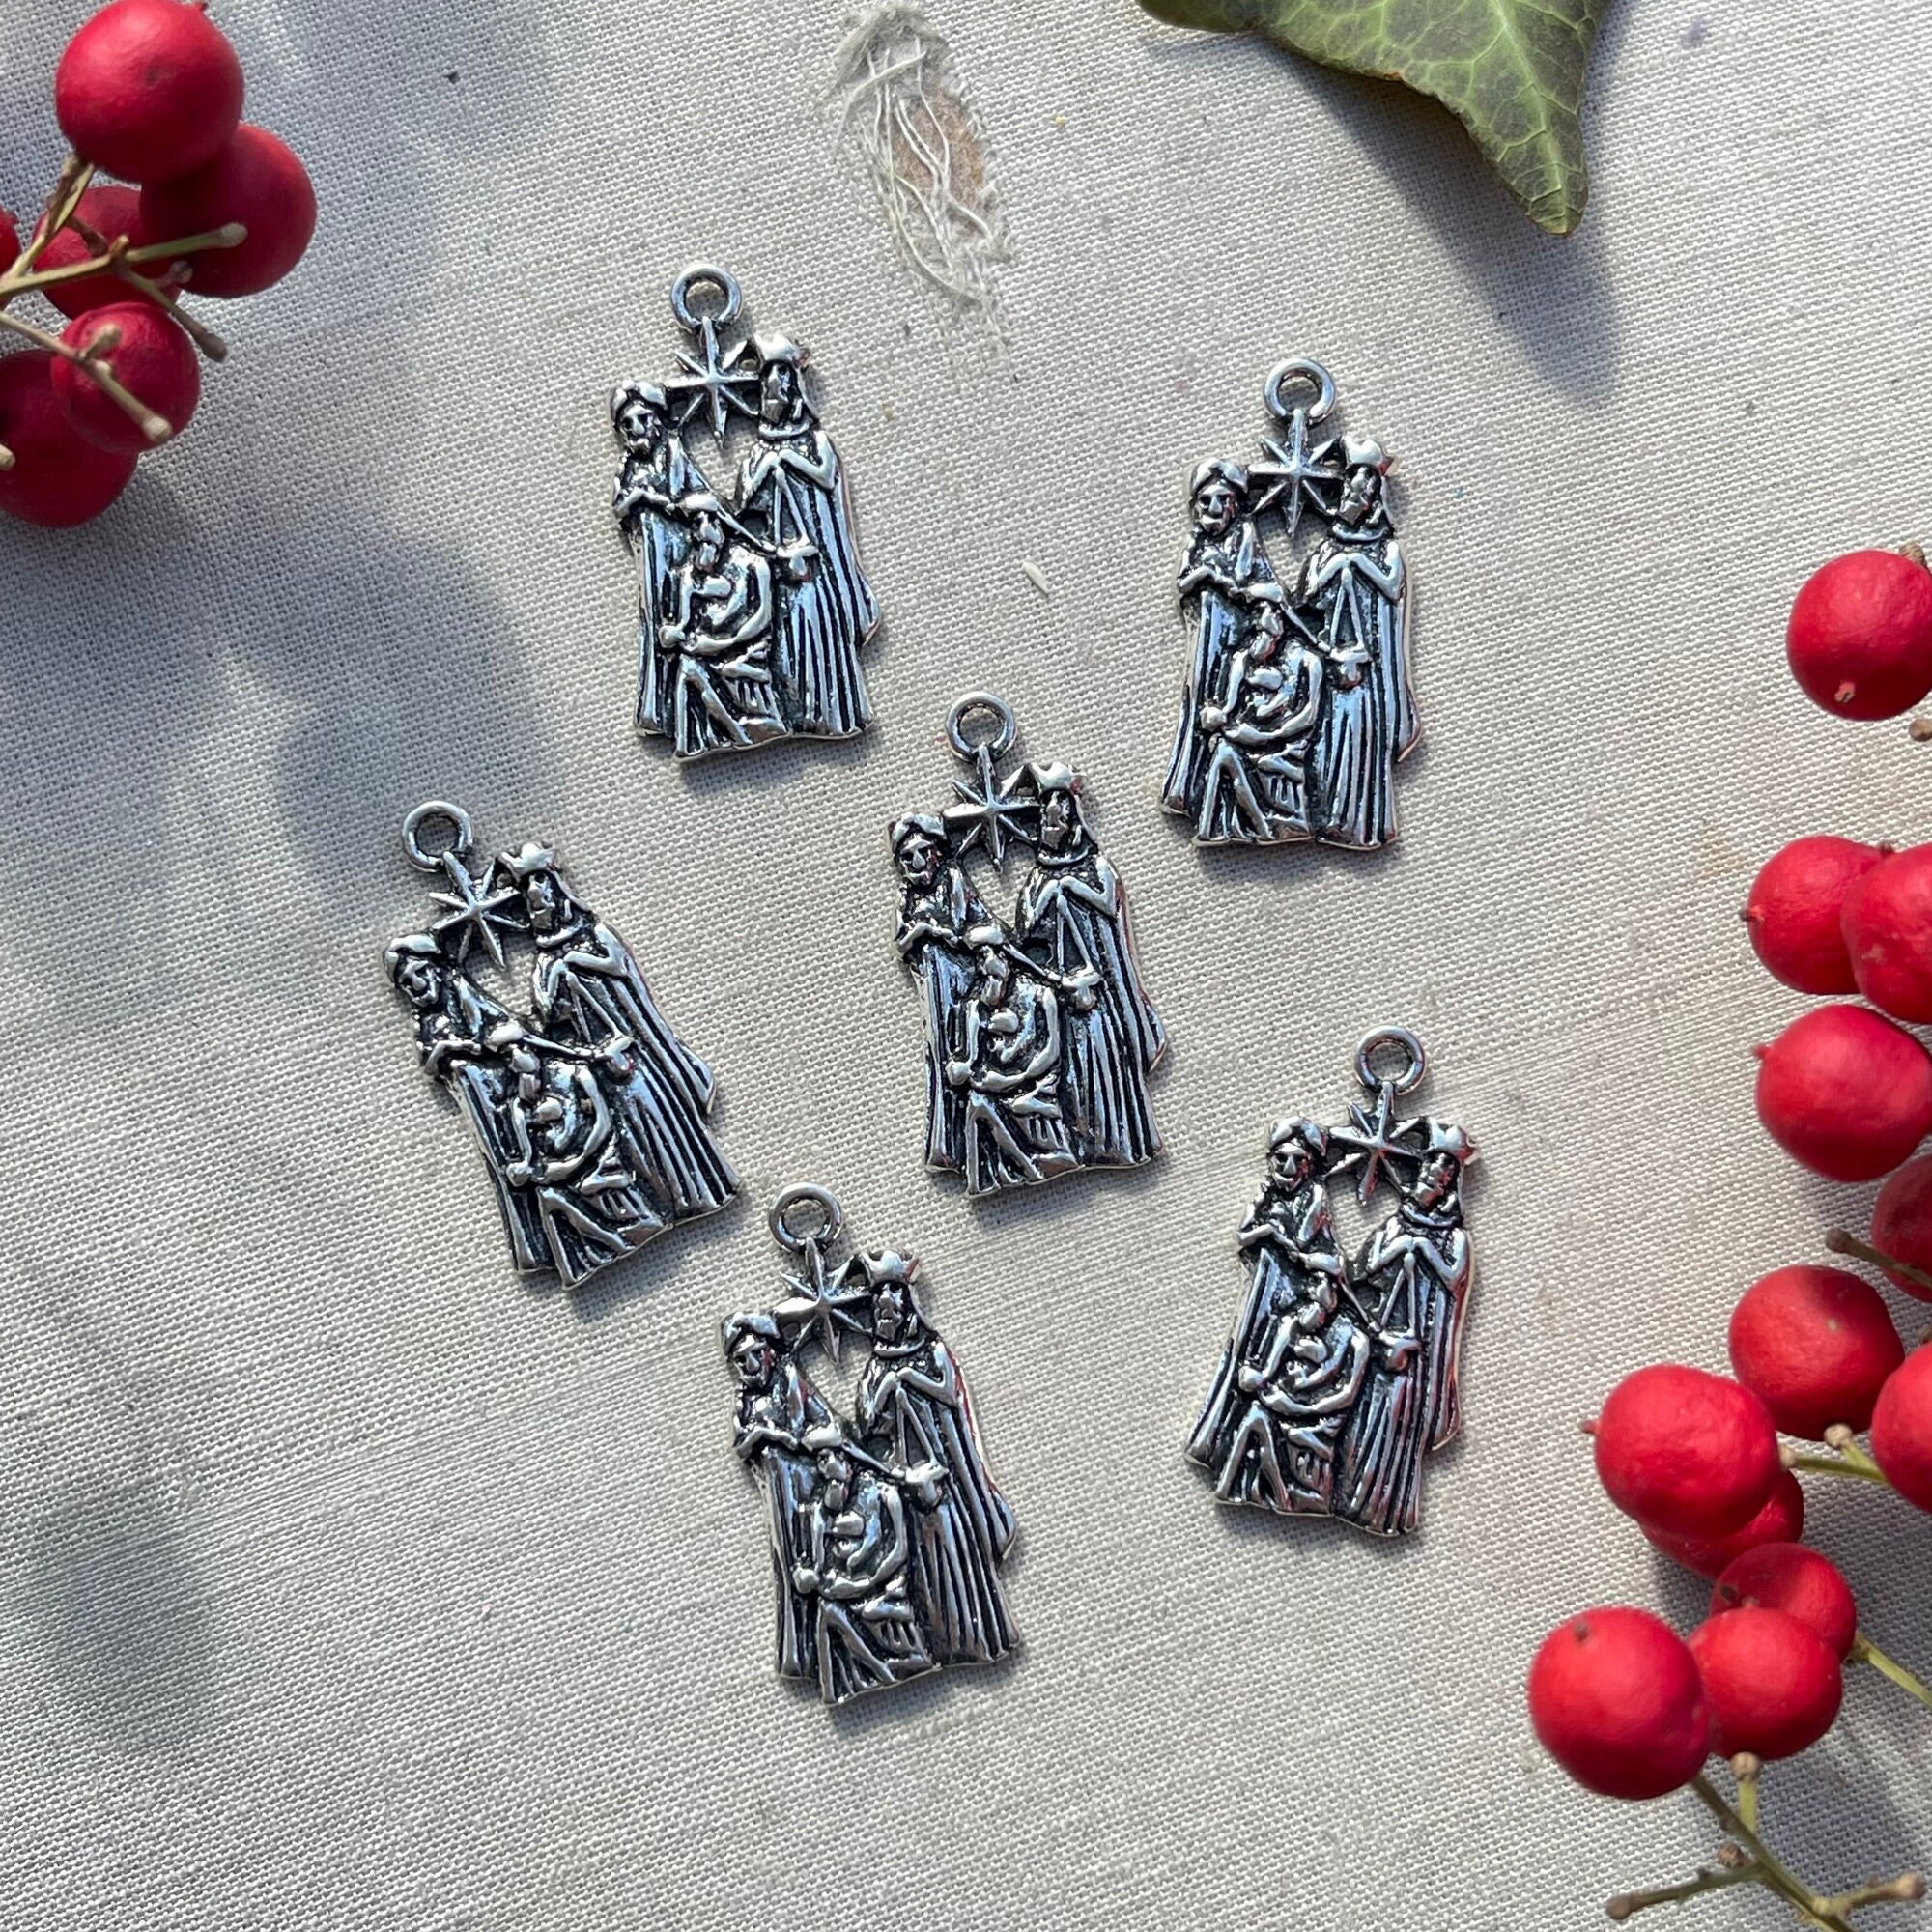 Wise Men Nativity Christmas Charm For Bracelets & Necklaces Silver Plated 